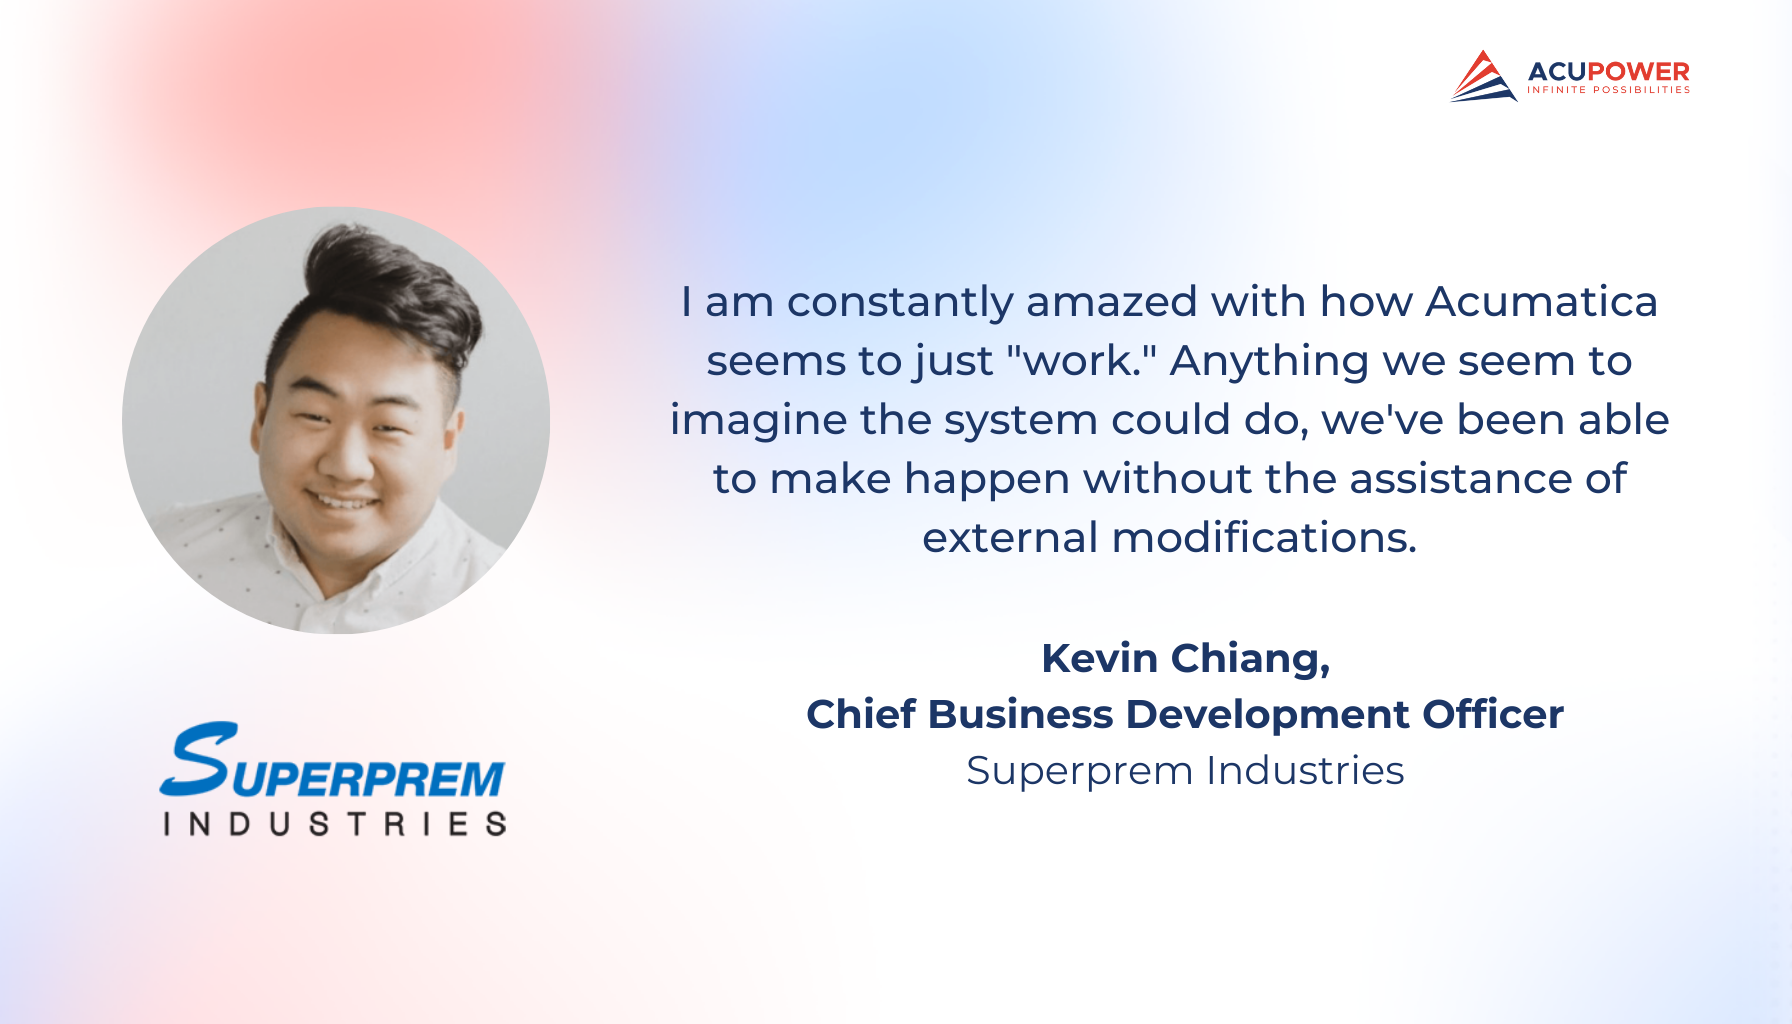 A quote of Kevin Chiang, Chief Business Development Officer of Superprem Industries. I am constantly amazed with how Acumatica seems to just work. Anything we seem to imagine the system could do, we've been able to make happen without the assistance of external modifications.